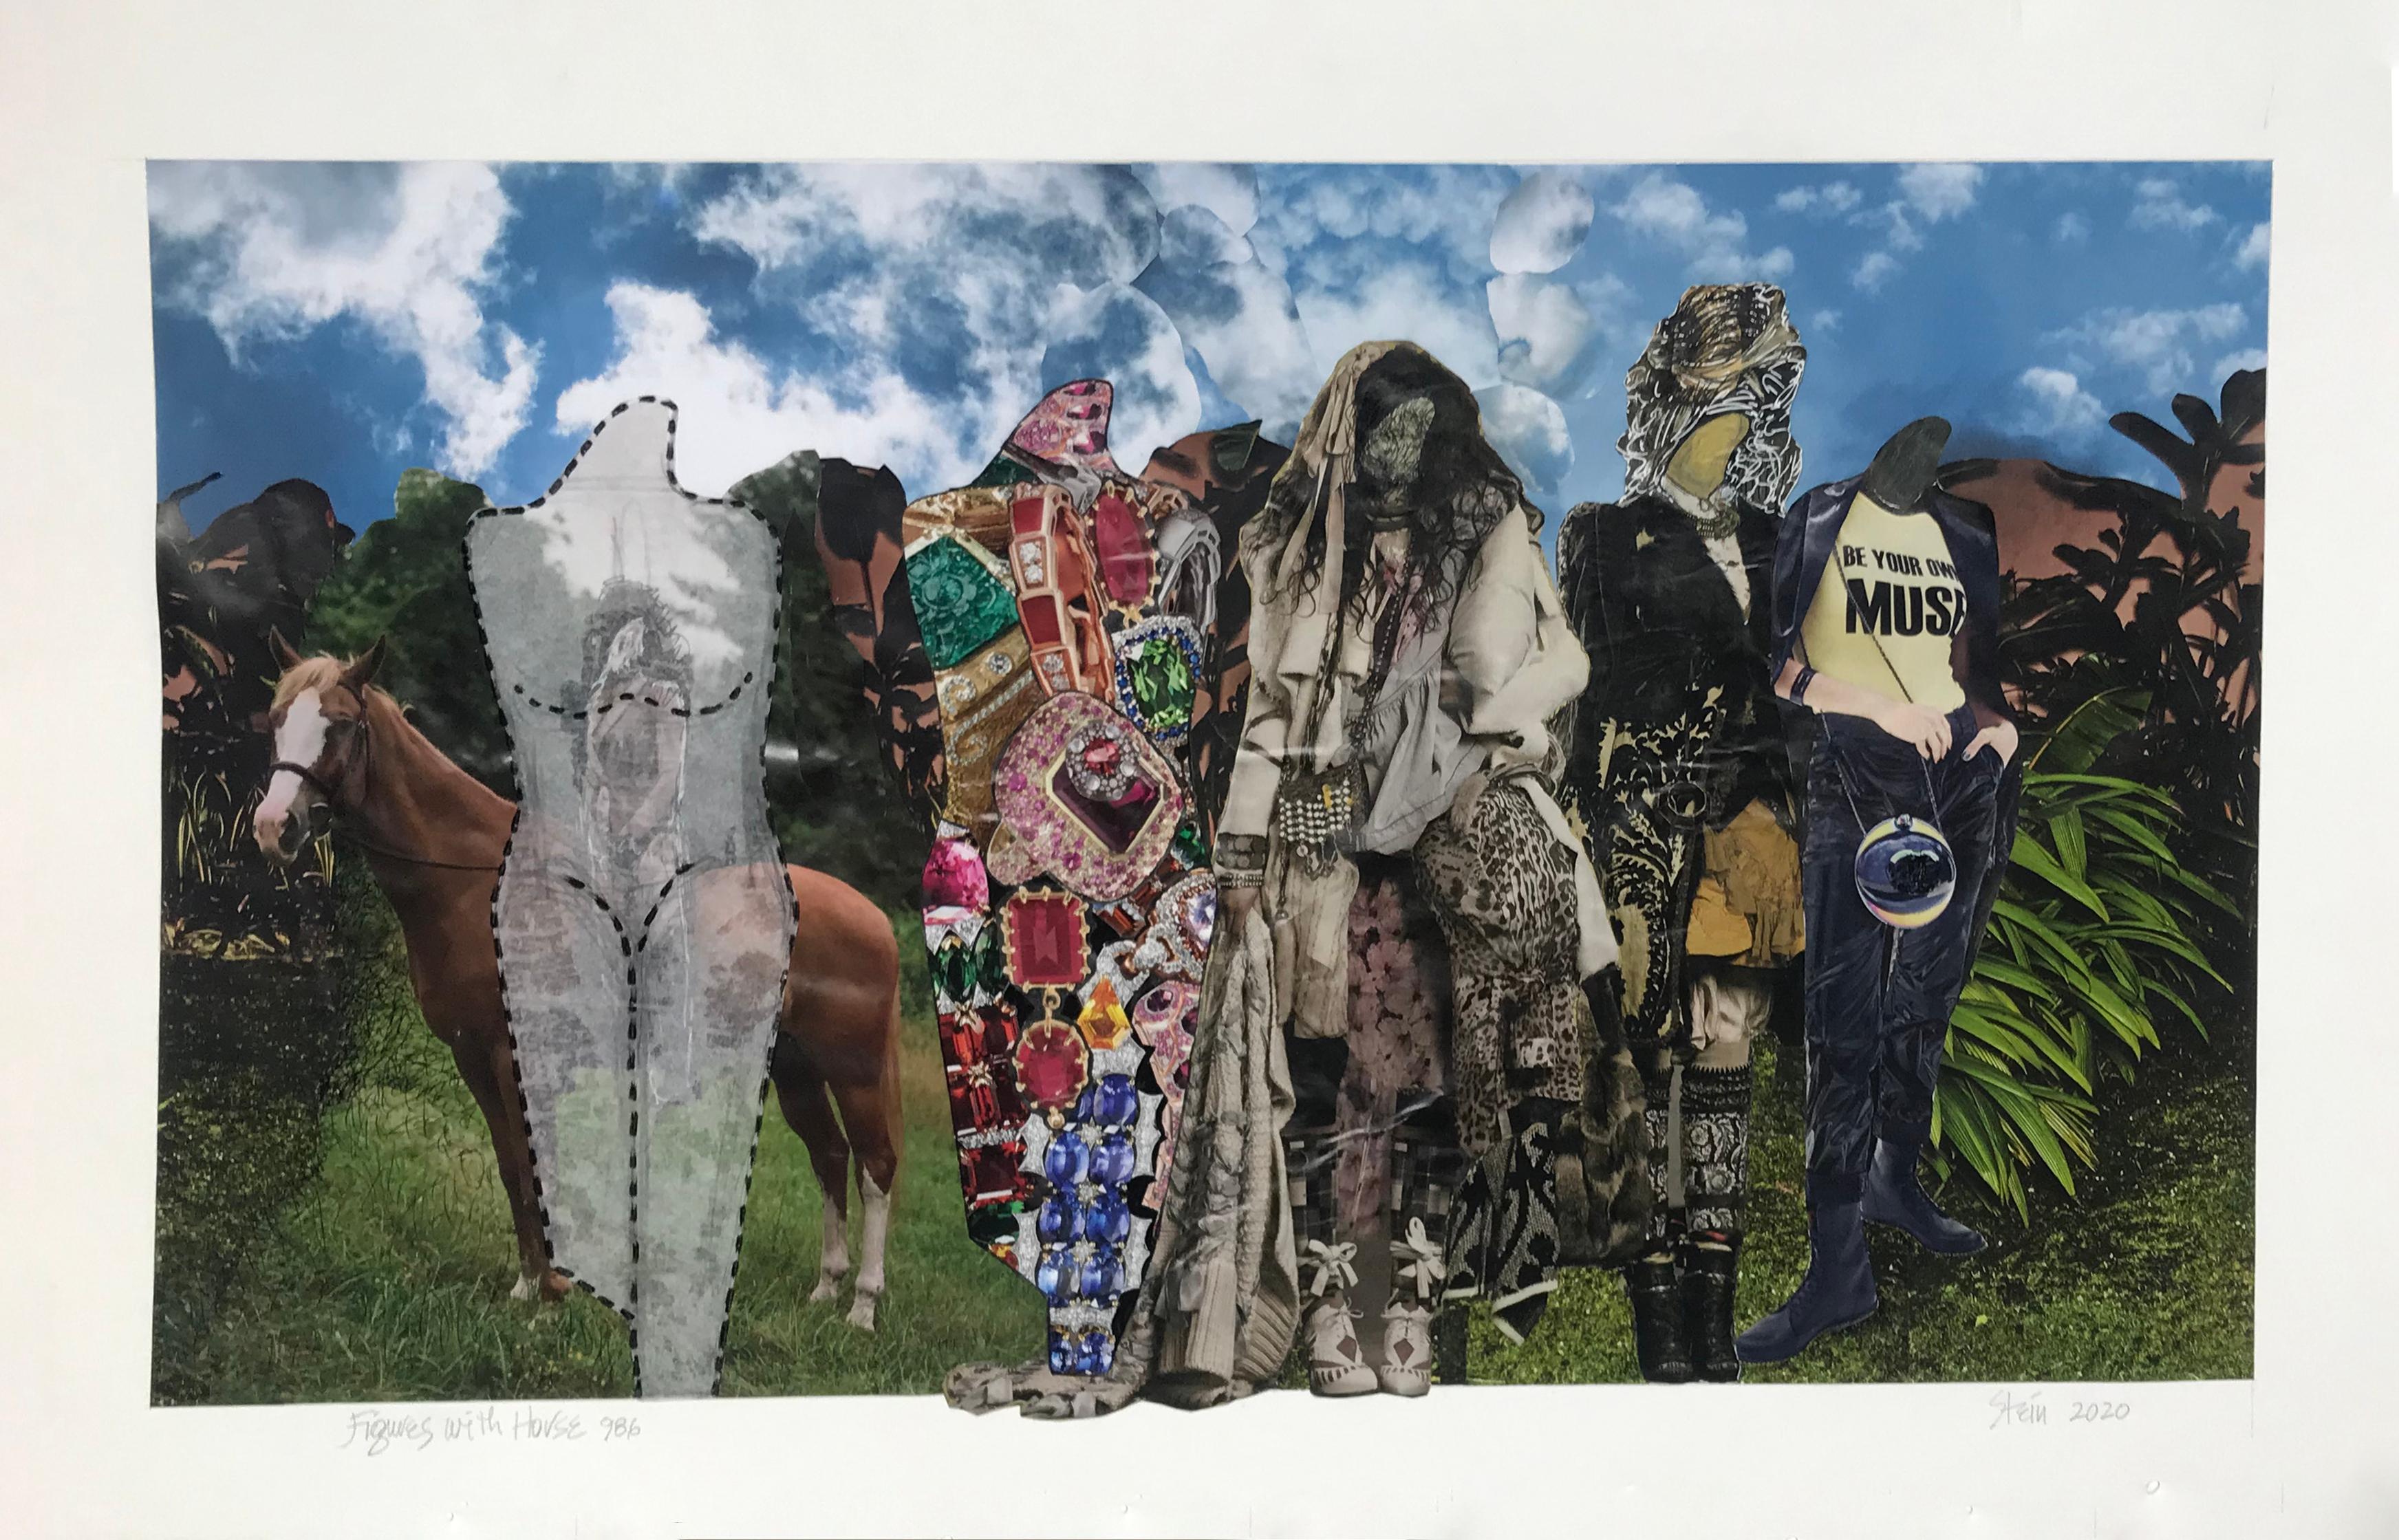 Linda Stein, Figures with Horse 986 - Contemporary Art Drawing Collage

In 2000,  Linda Stein began a series called Knights of Protection.  Her Knights functioned both as defenders in battle and symbols of pacifism.  

In 2019, Stein re-conceived